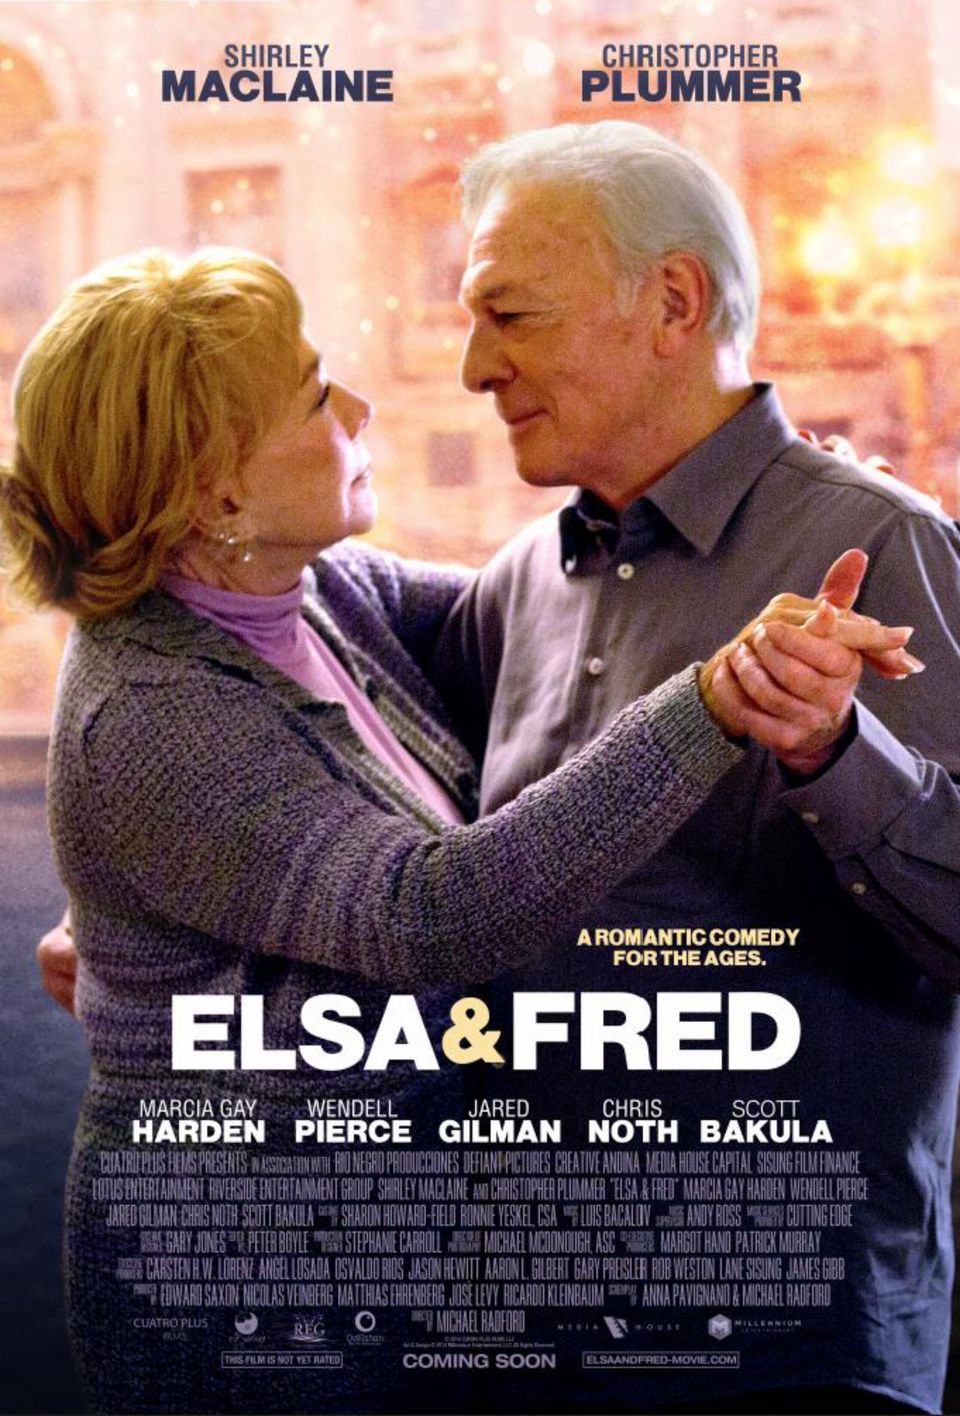 Shirley MacLaine y Christopher Plummer son "Elsa and Fred"